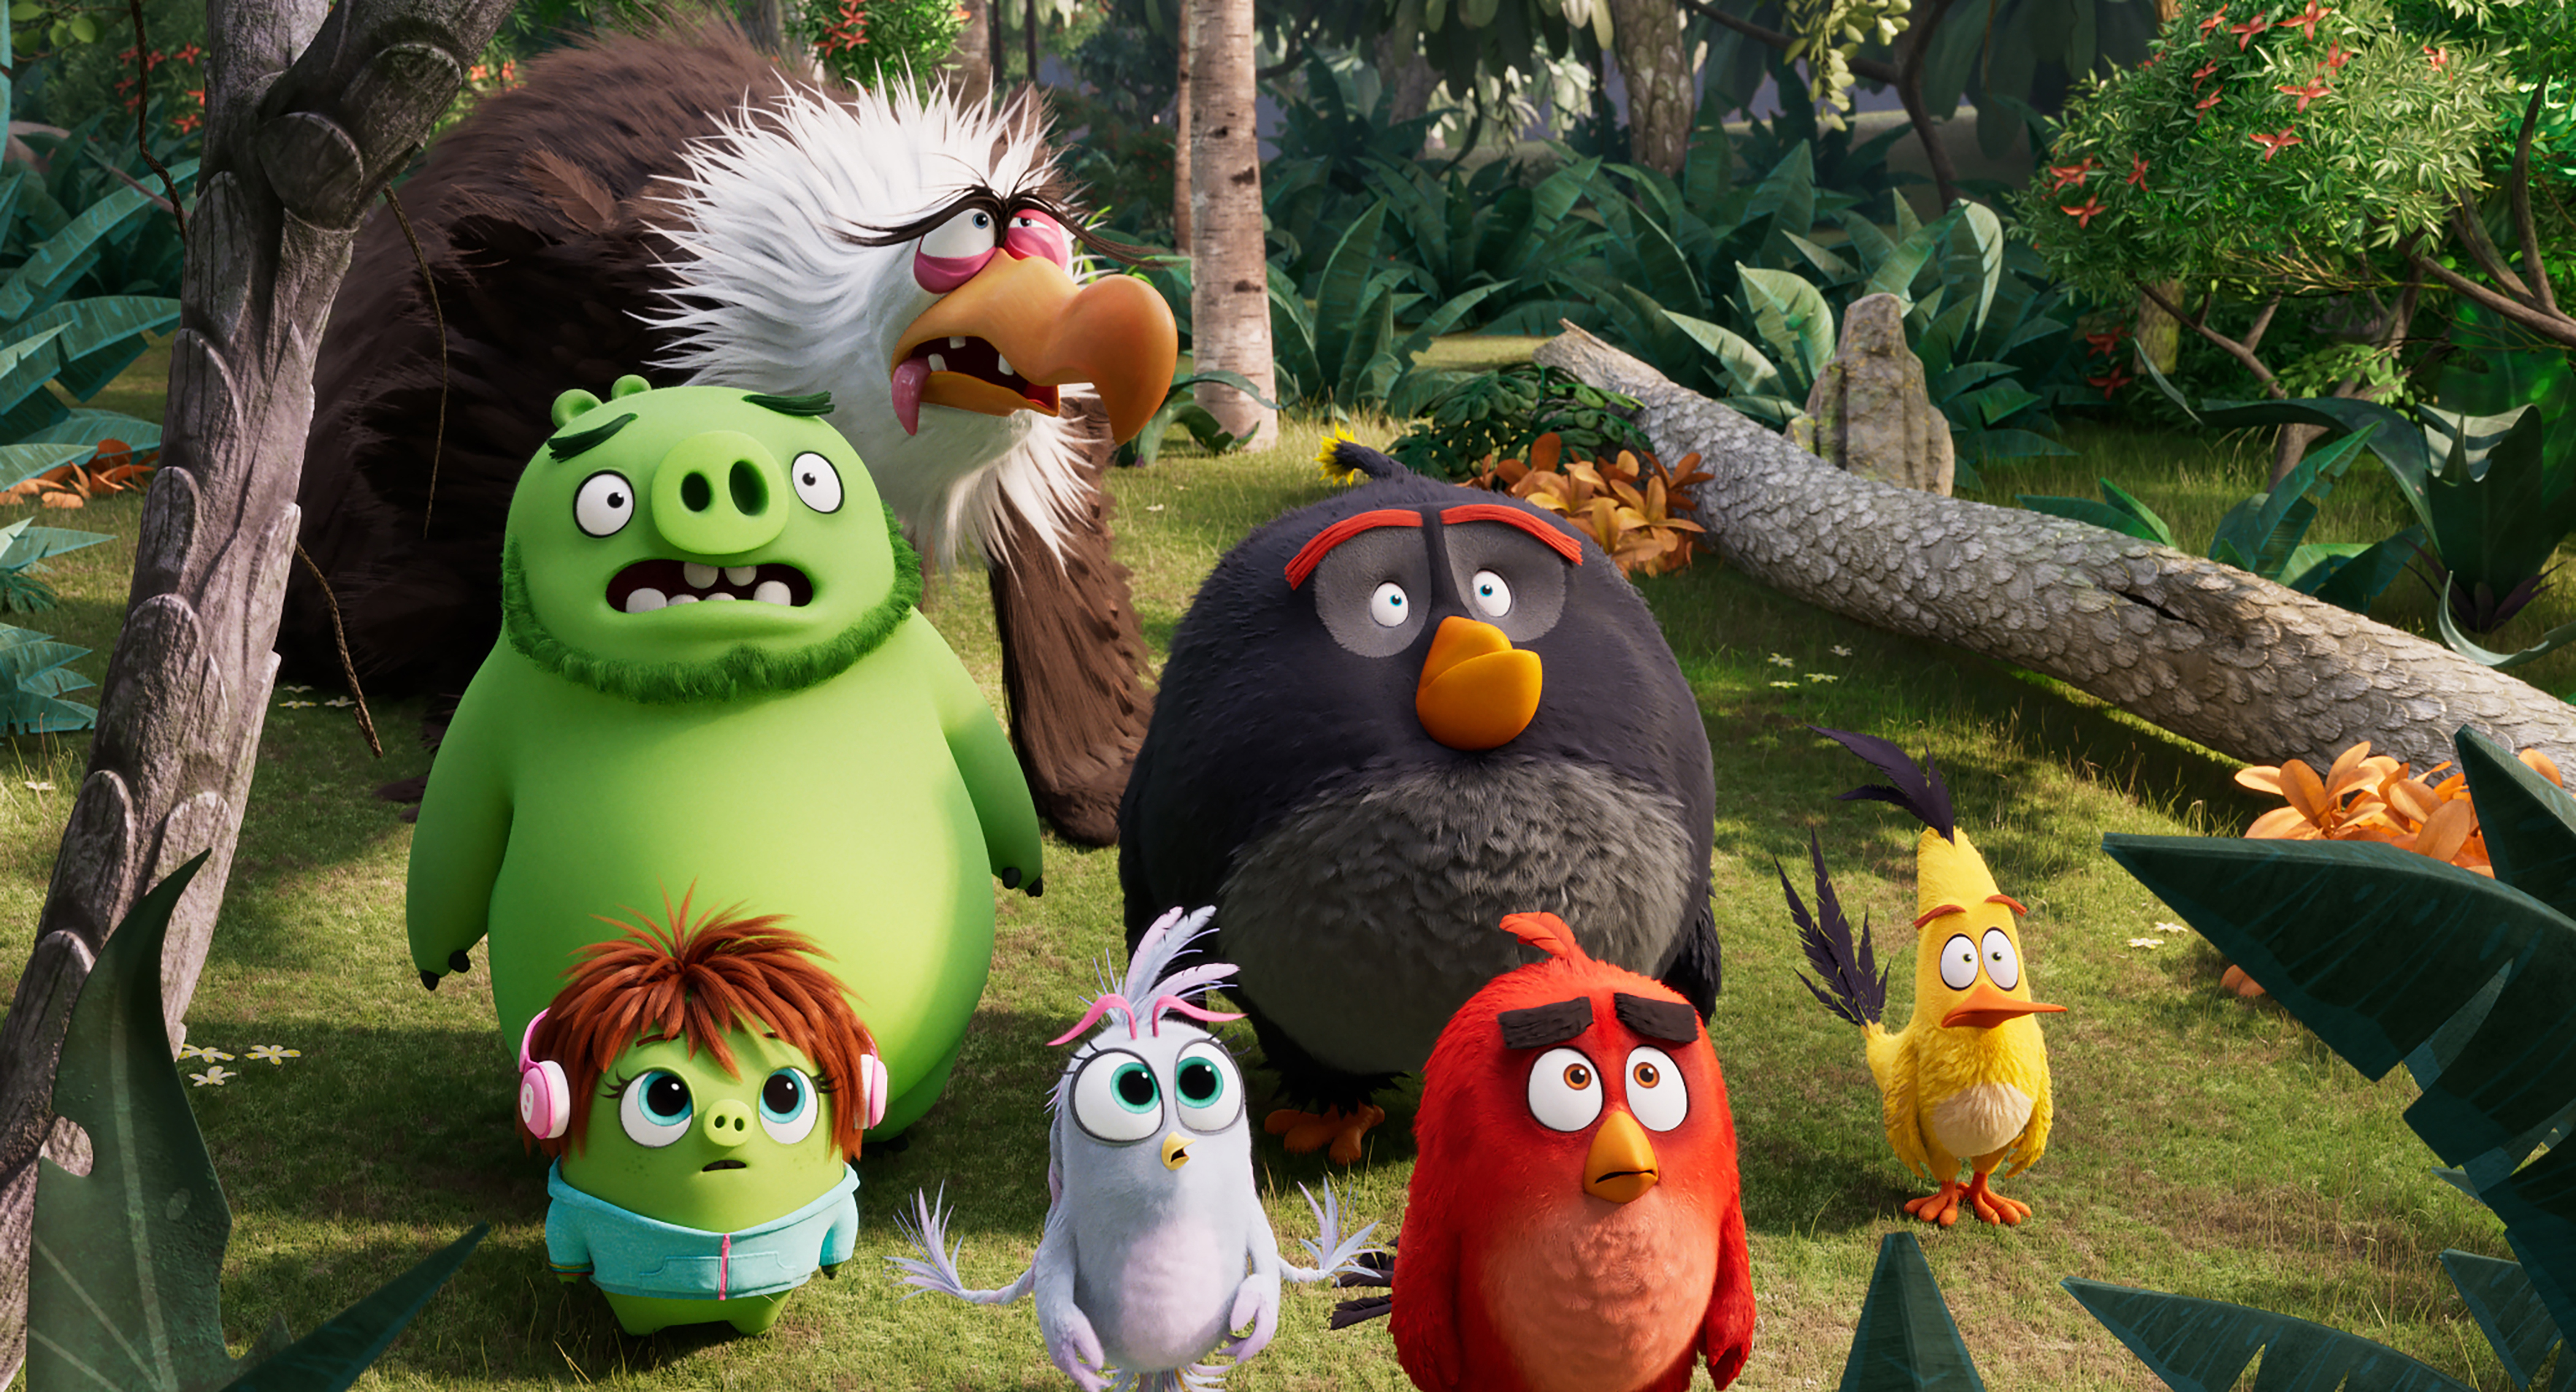 The birds team up with the pigs against a new enemy in 'The Angry Birds Movie 2'.